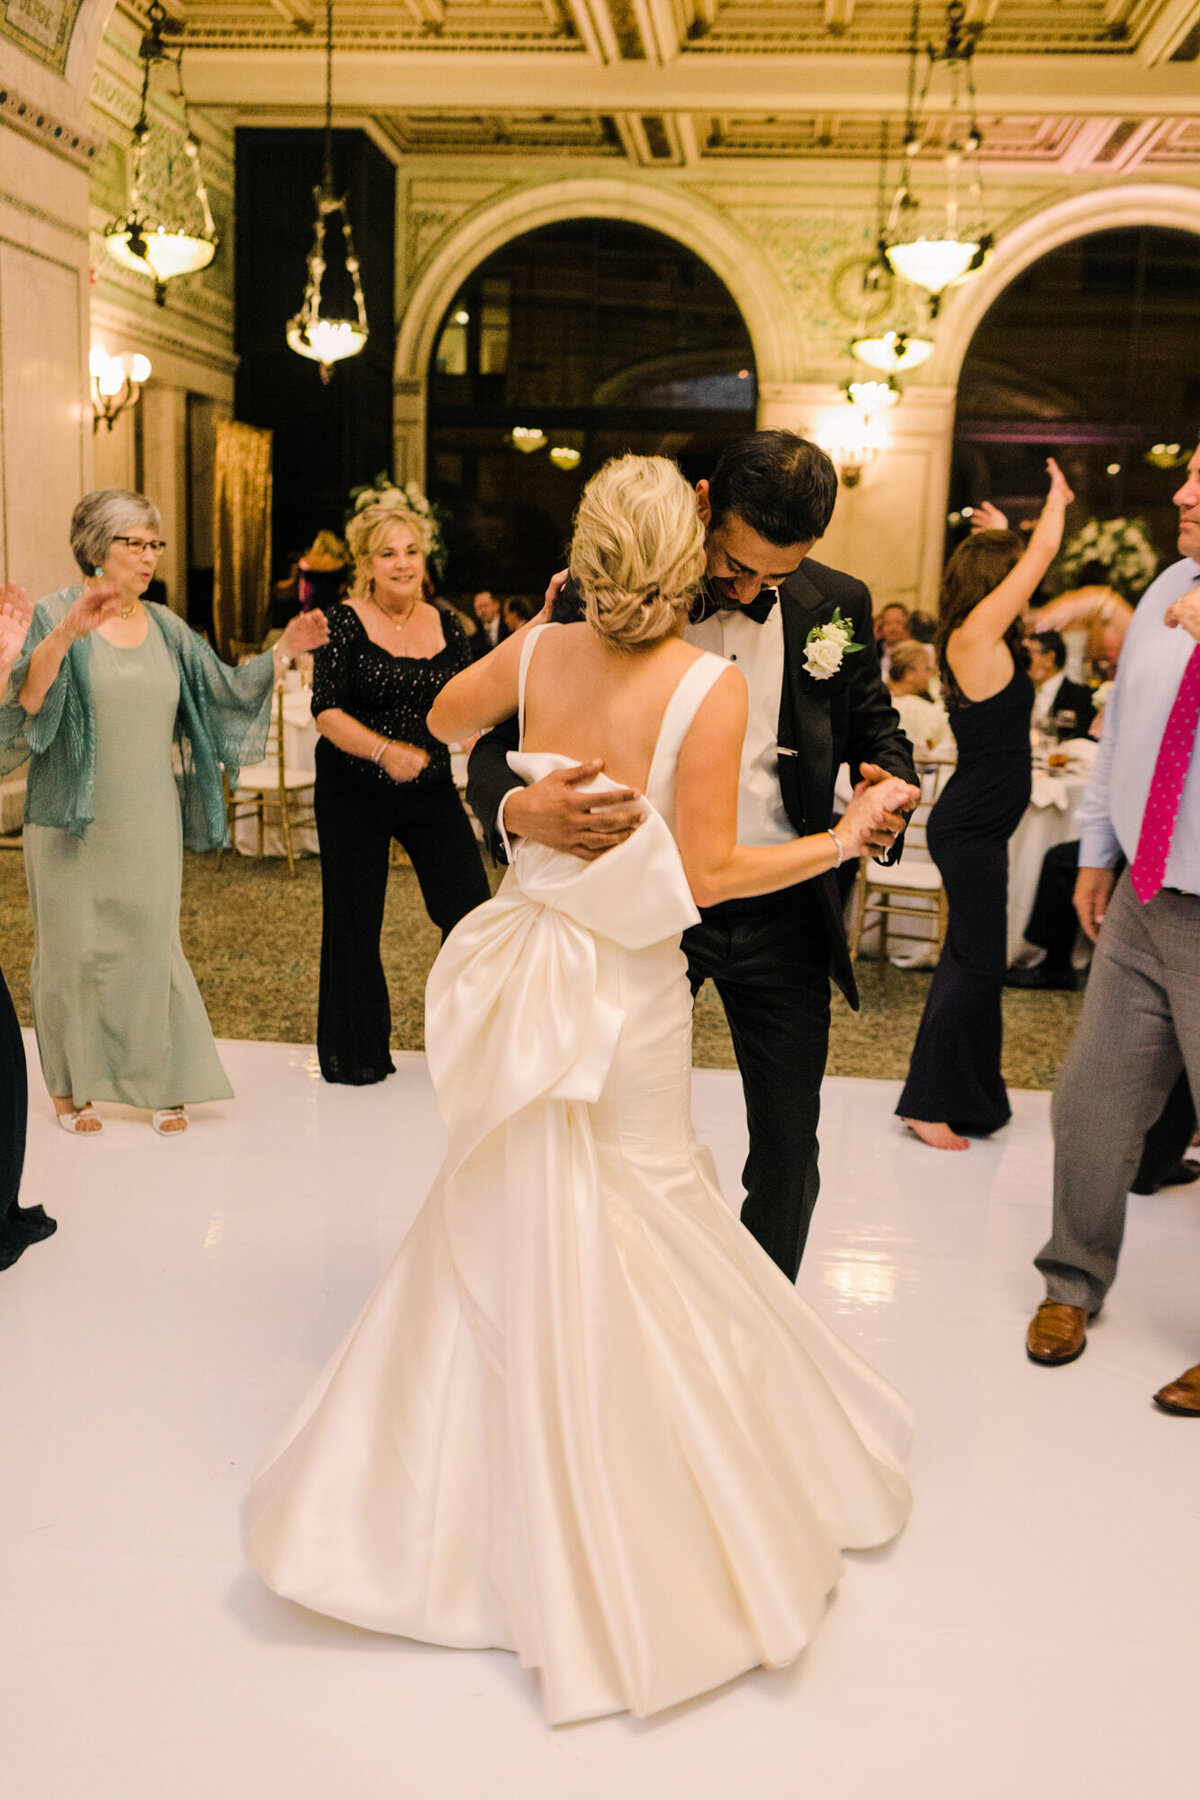 Newlyweds share a dance at their wedding reception at the Chicago Cultural Center